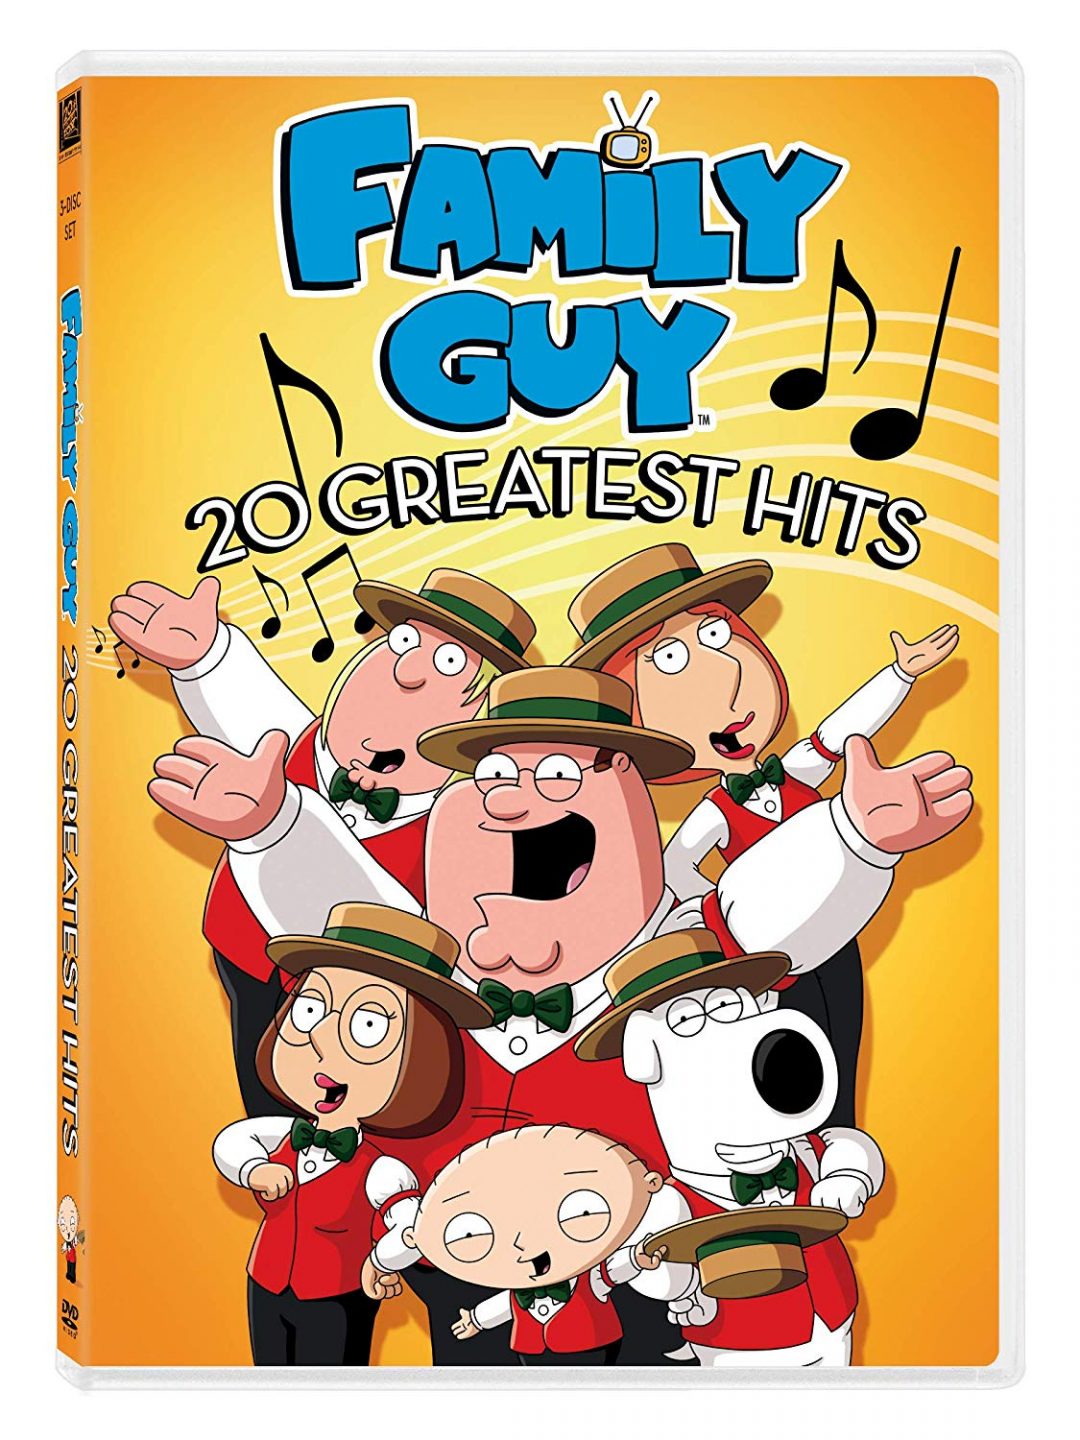 Family Guy 20 Greatest Hits DVD cover (20th Century Fox Home Entertainment)